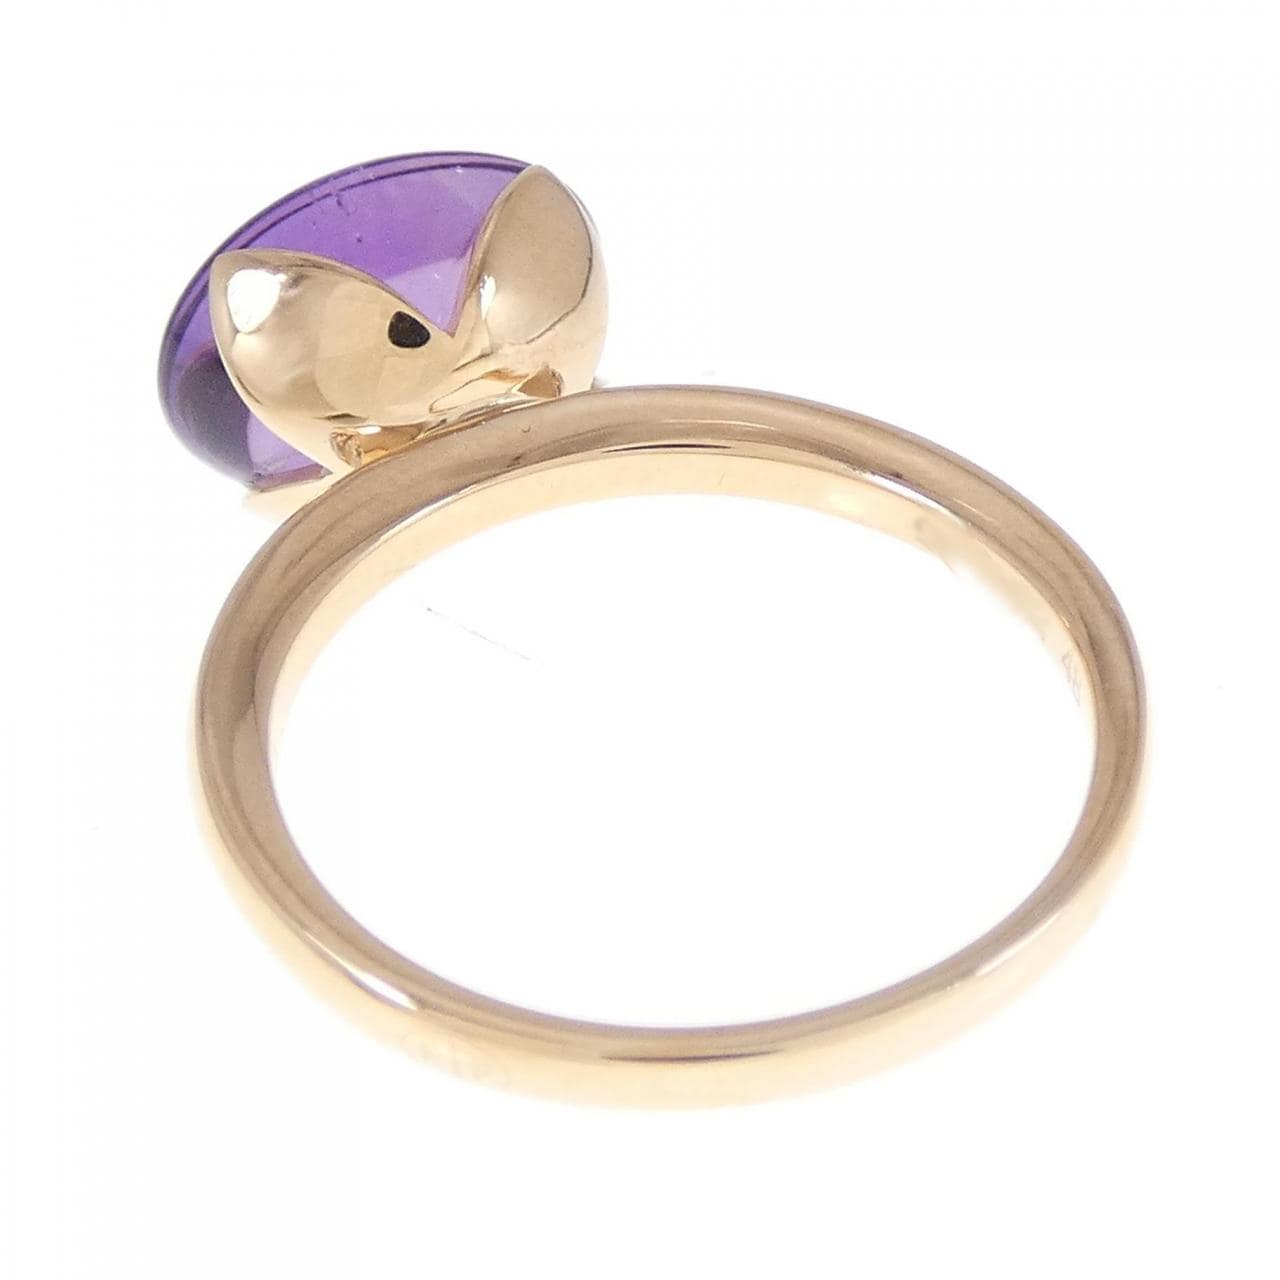 FRED mademoiselle delphine ring